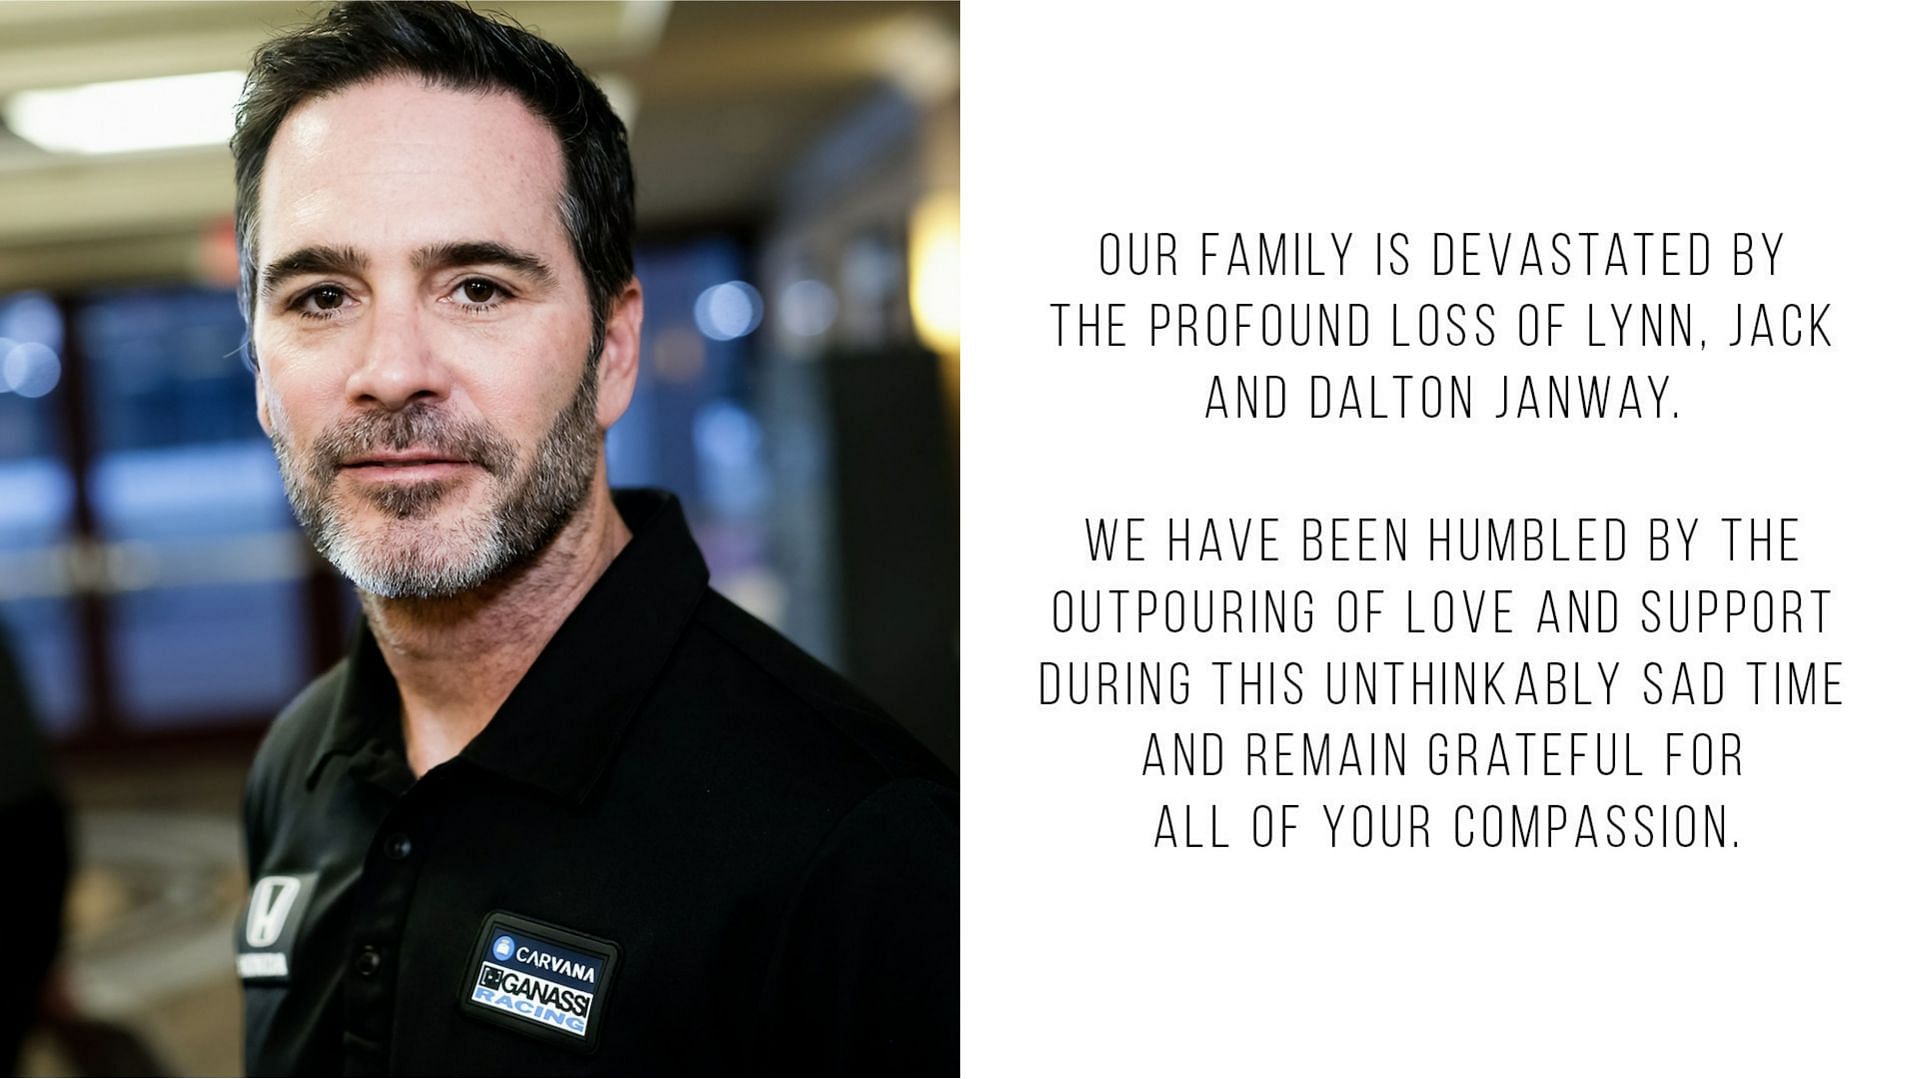 Jimmie Johnson releases a statement after suffering from the tragic incident